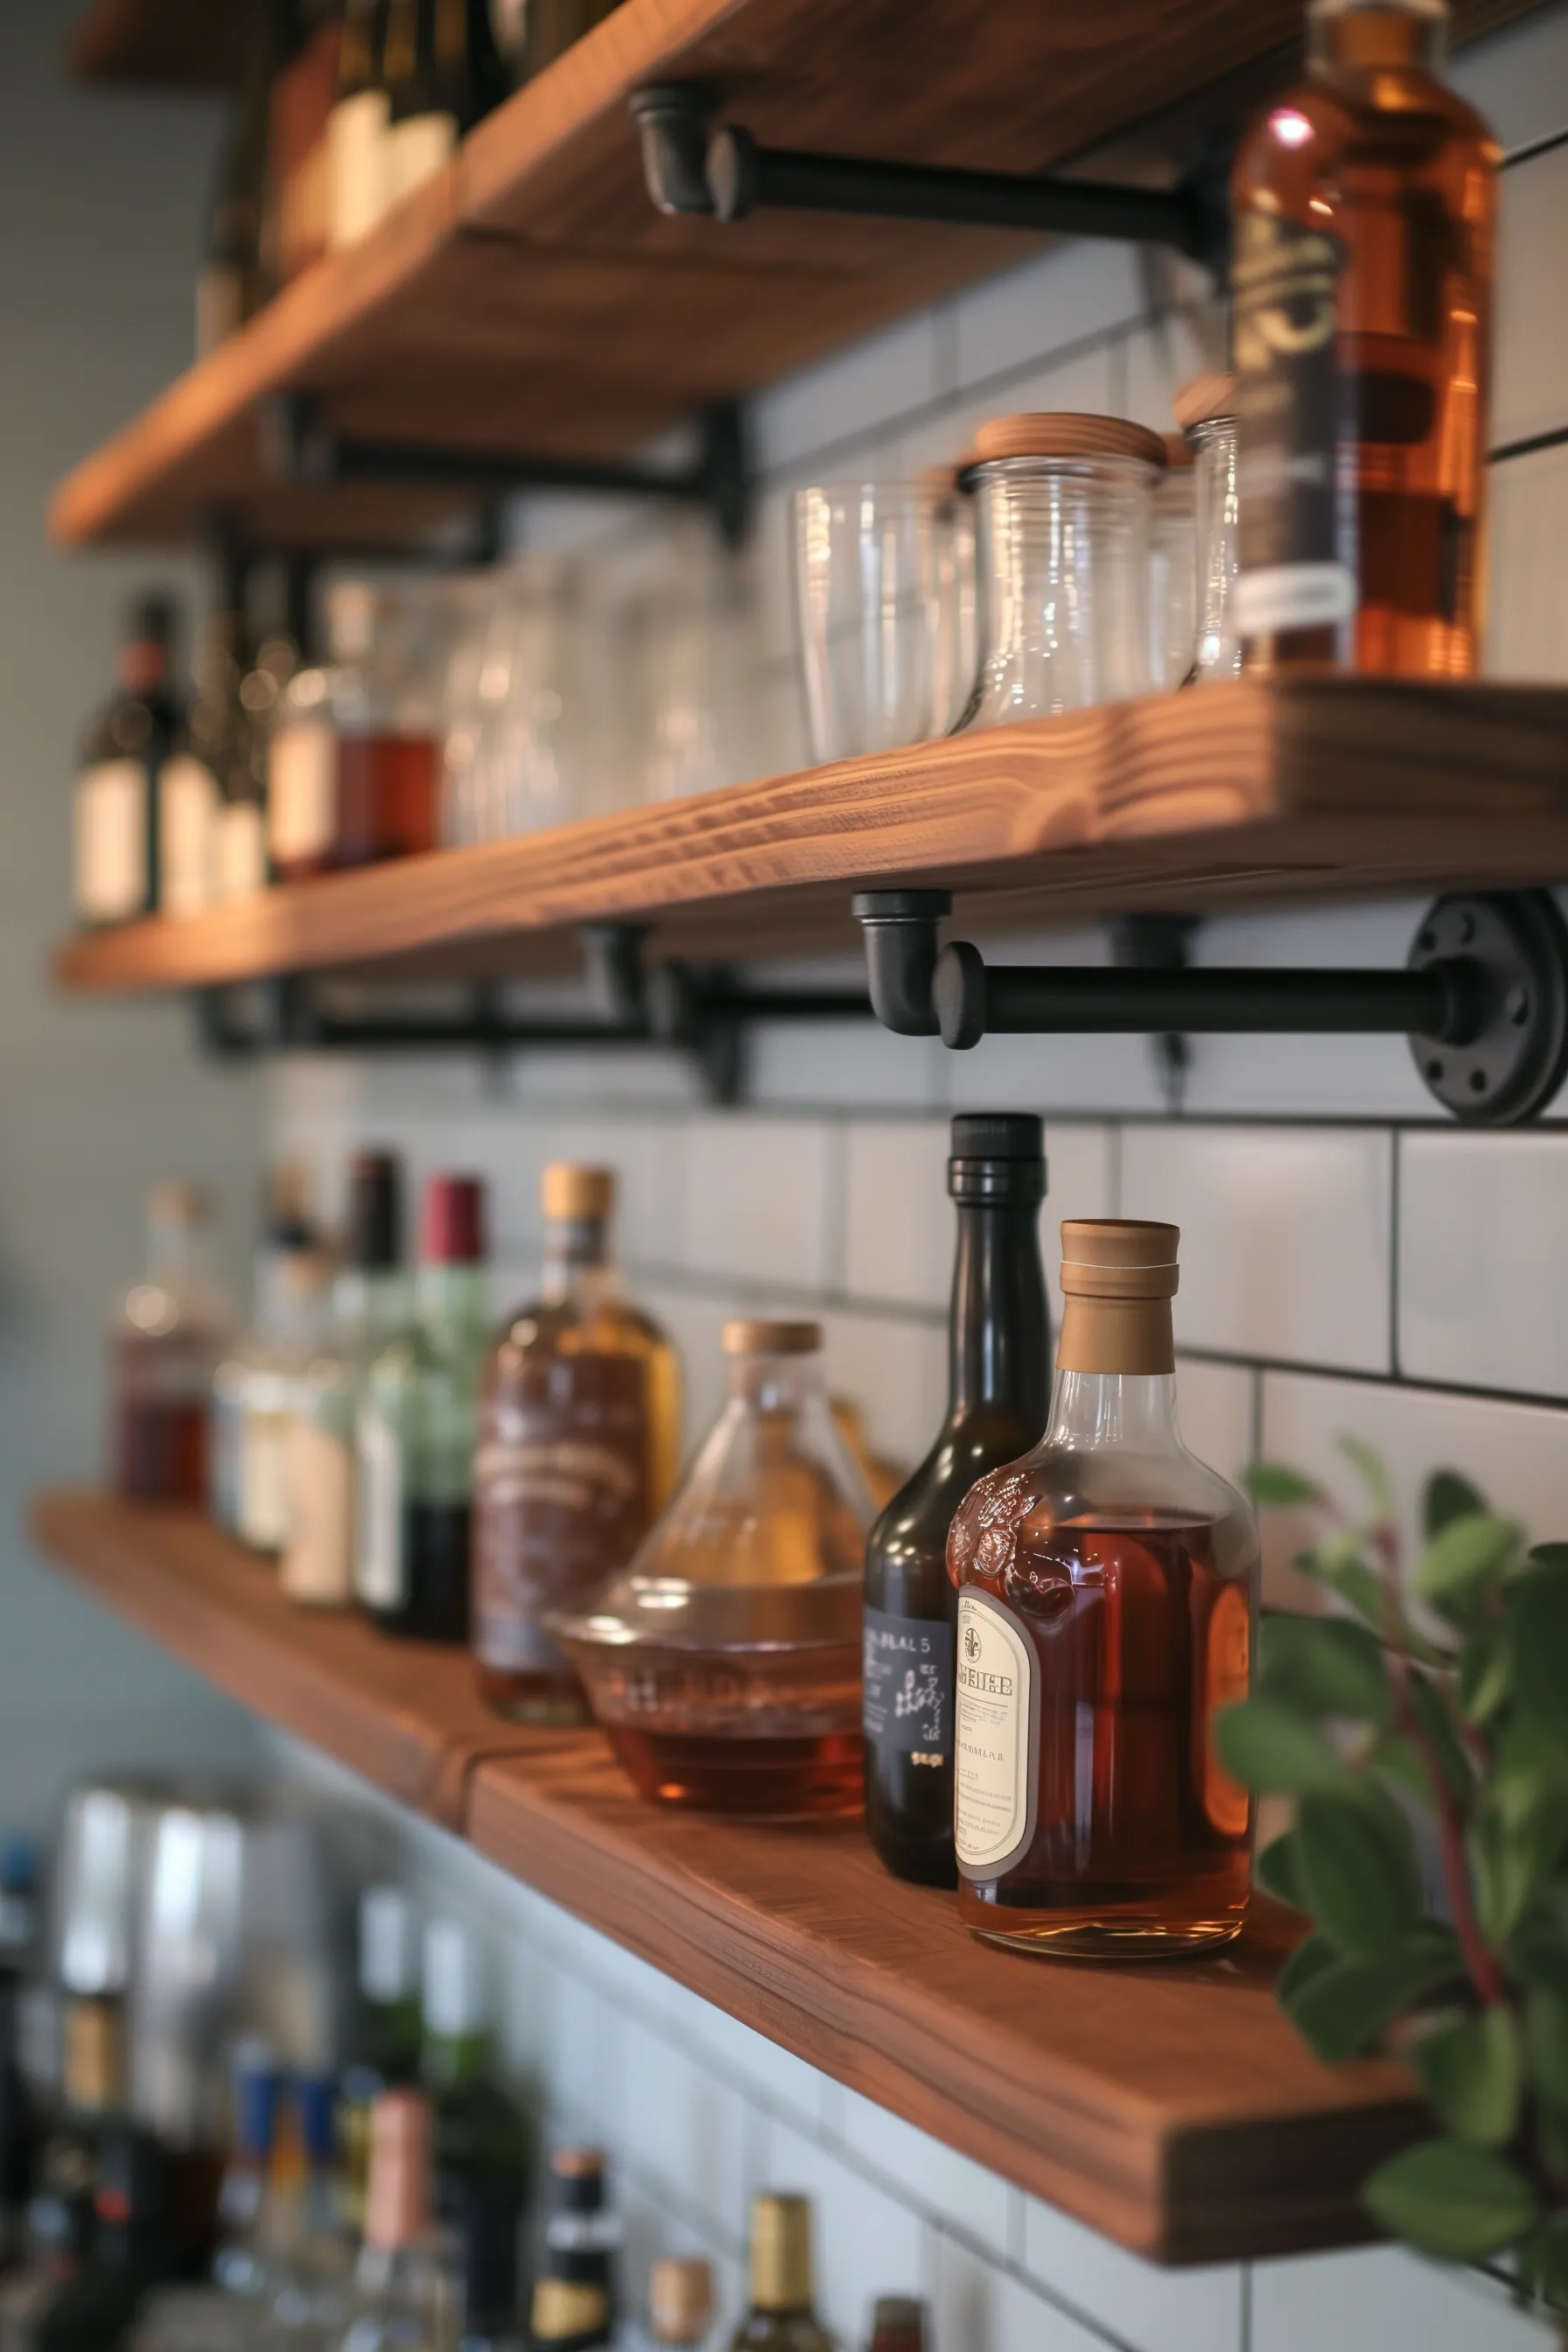 A bar with a magnetic bottle holder